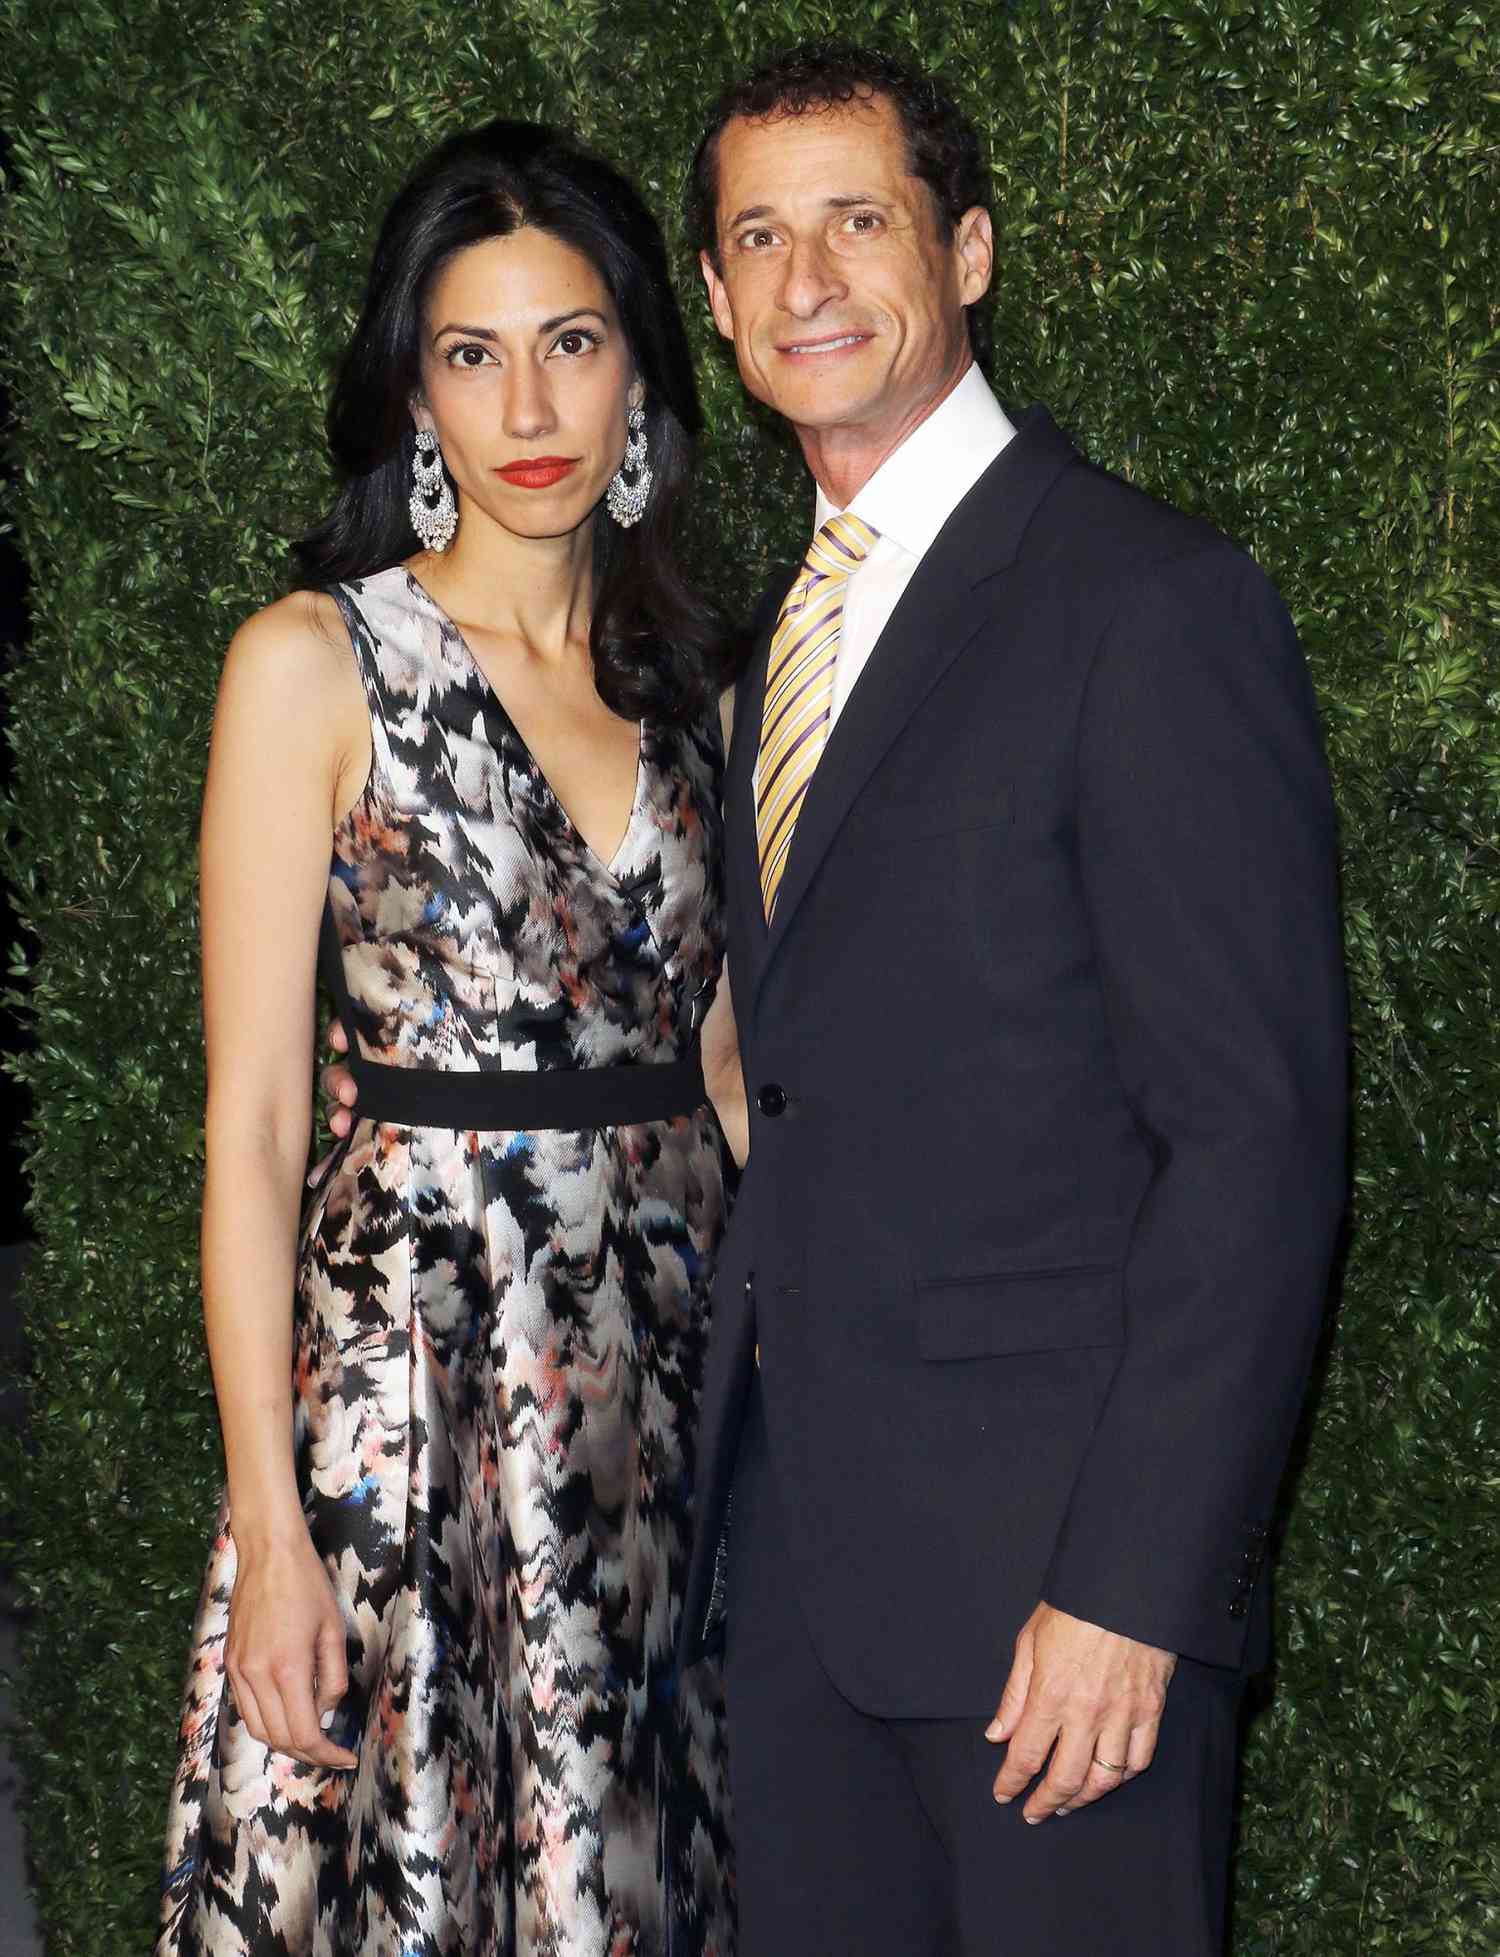 Political staffer Huma Abedin and former U.S. Representative Anthony Weiner attend the 12th annual CFDA/Vogue Fashion Fund Awards at Spring Studios on November 2, 2015 在纽约市